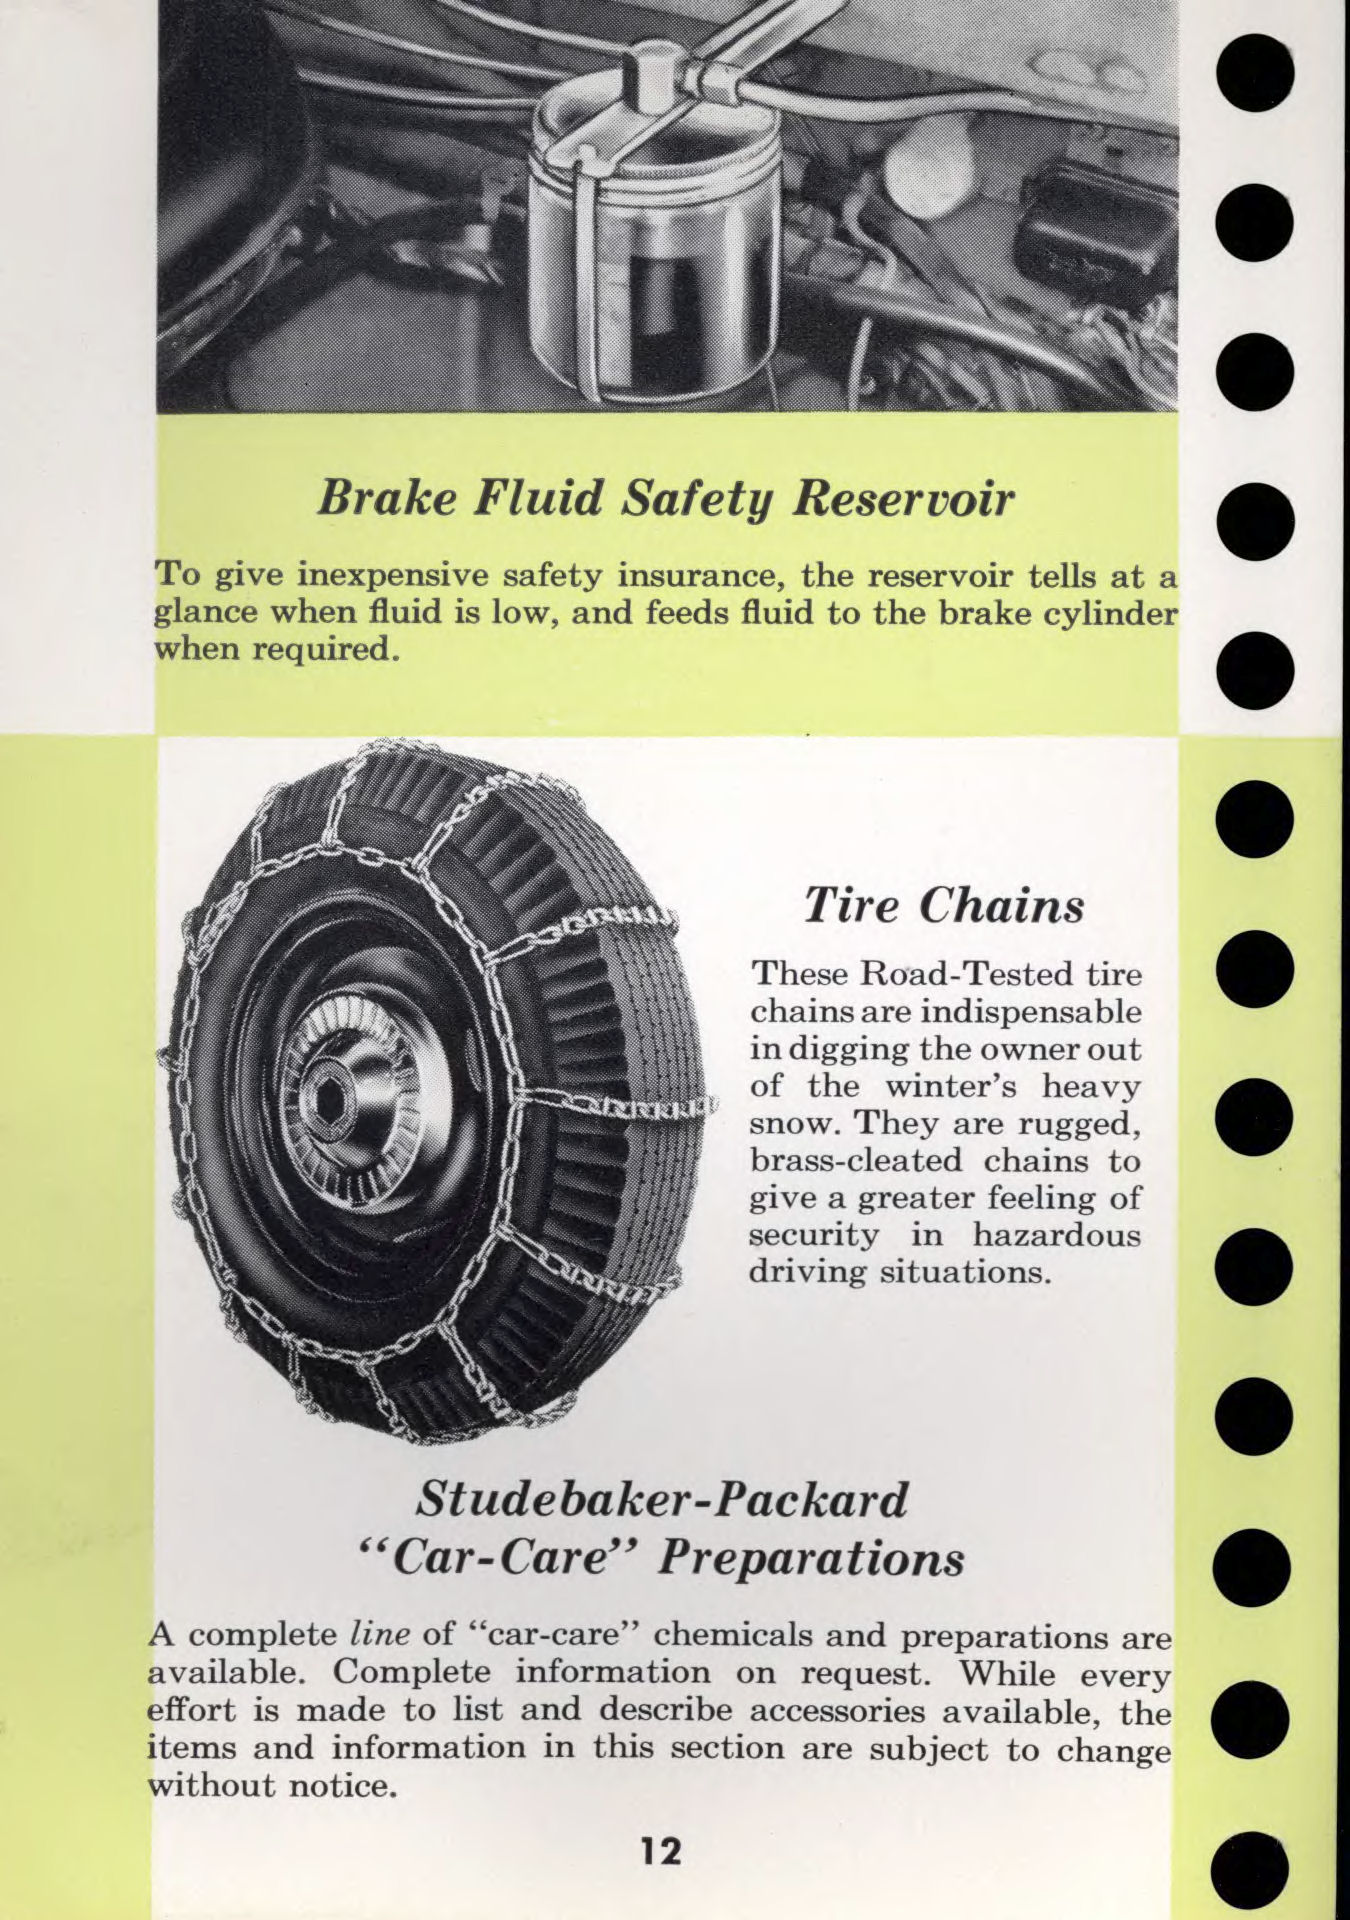 1956 Packard Data Book Page 45